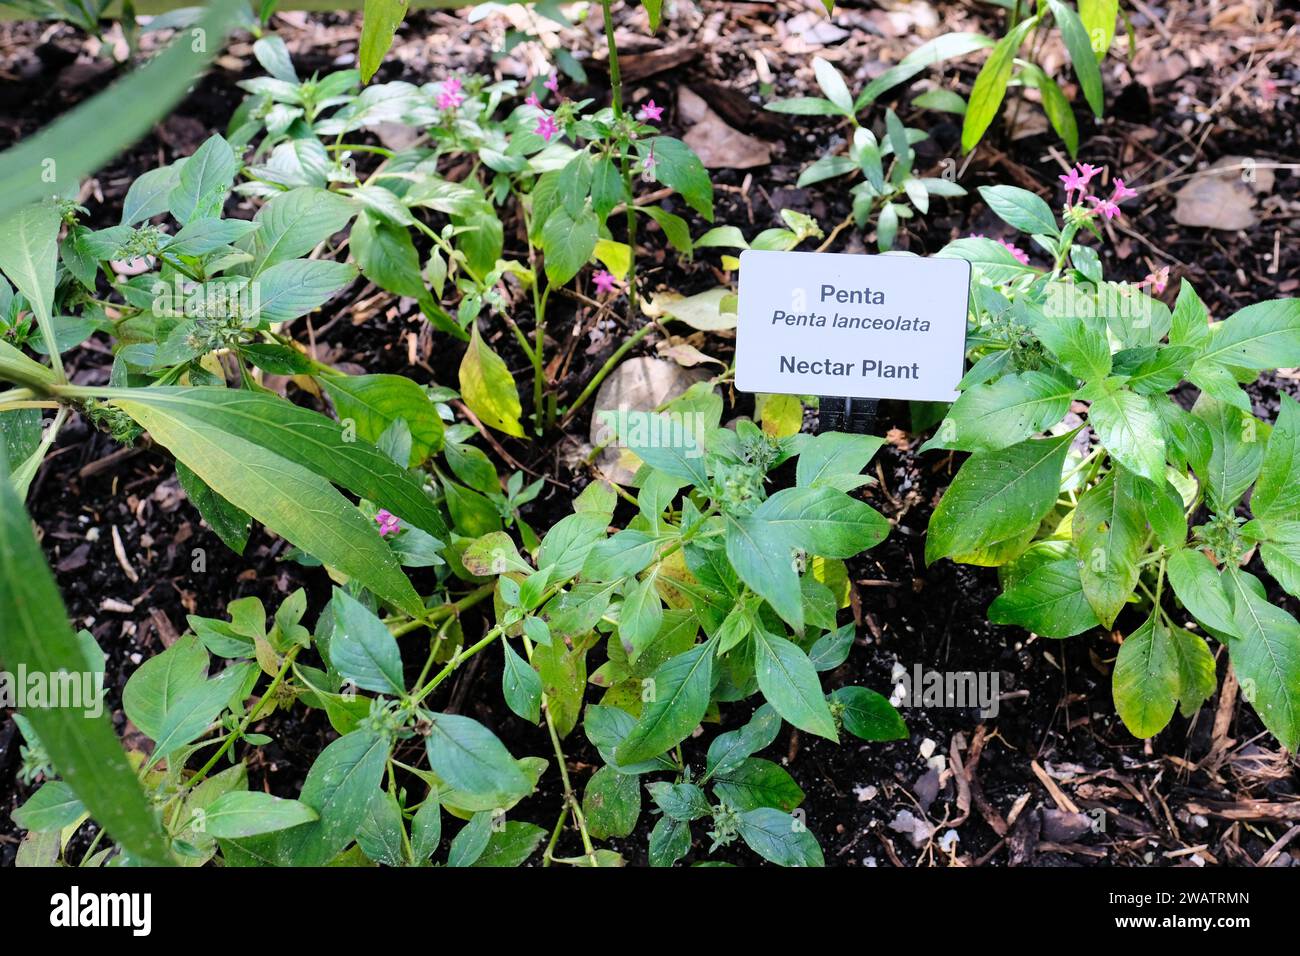 Label in a garden for Penta Lanceolata, a herbaceous perennial plant that grows flowers popular with bees, butterflies and hummingbirds; nectar plant. Stock Photo